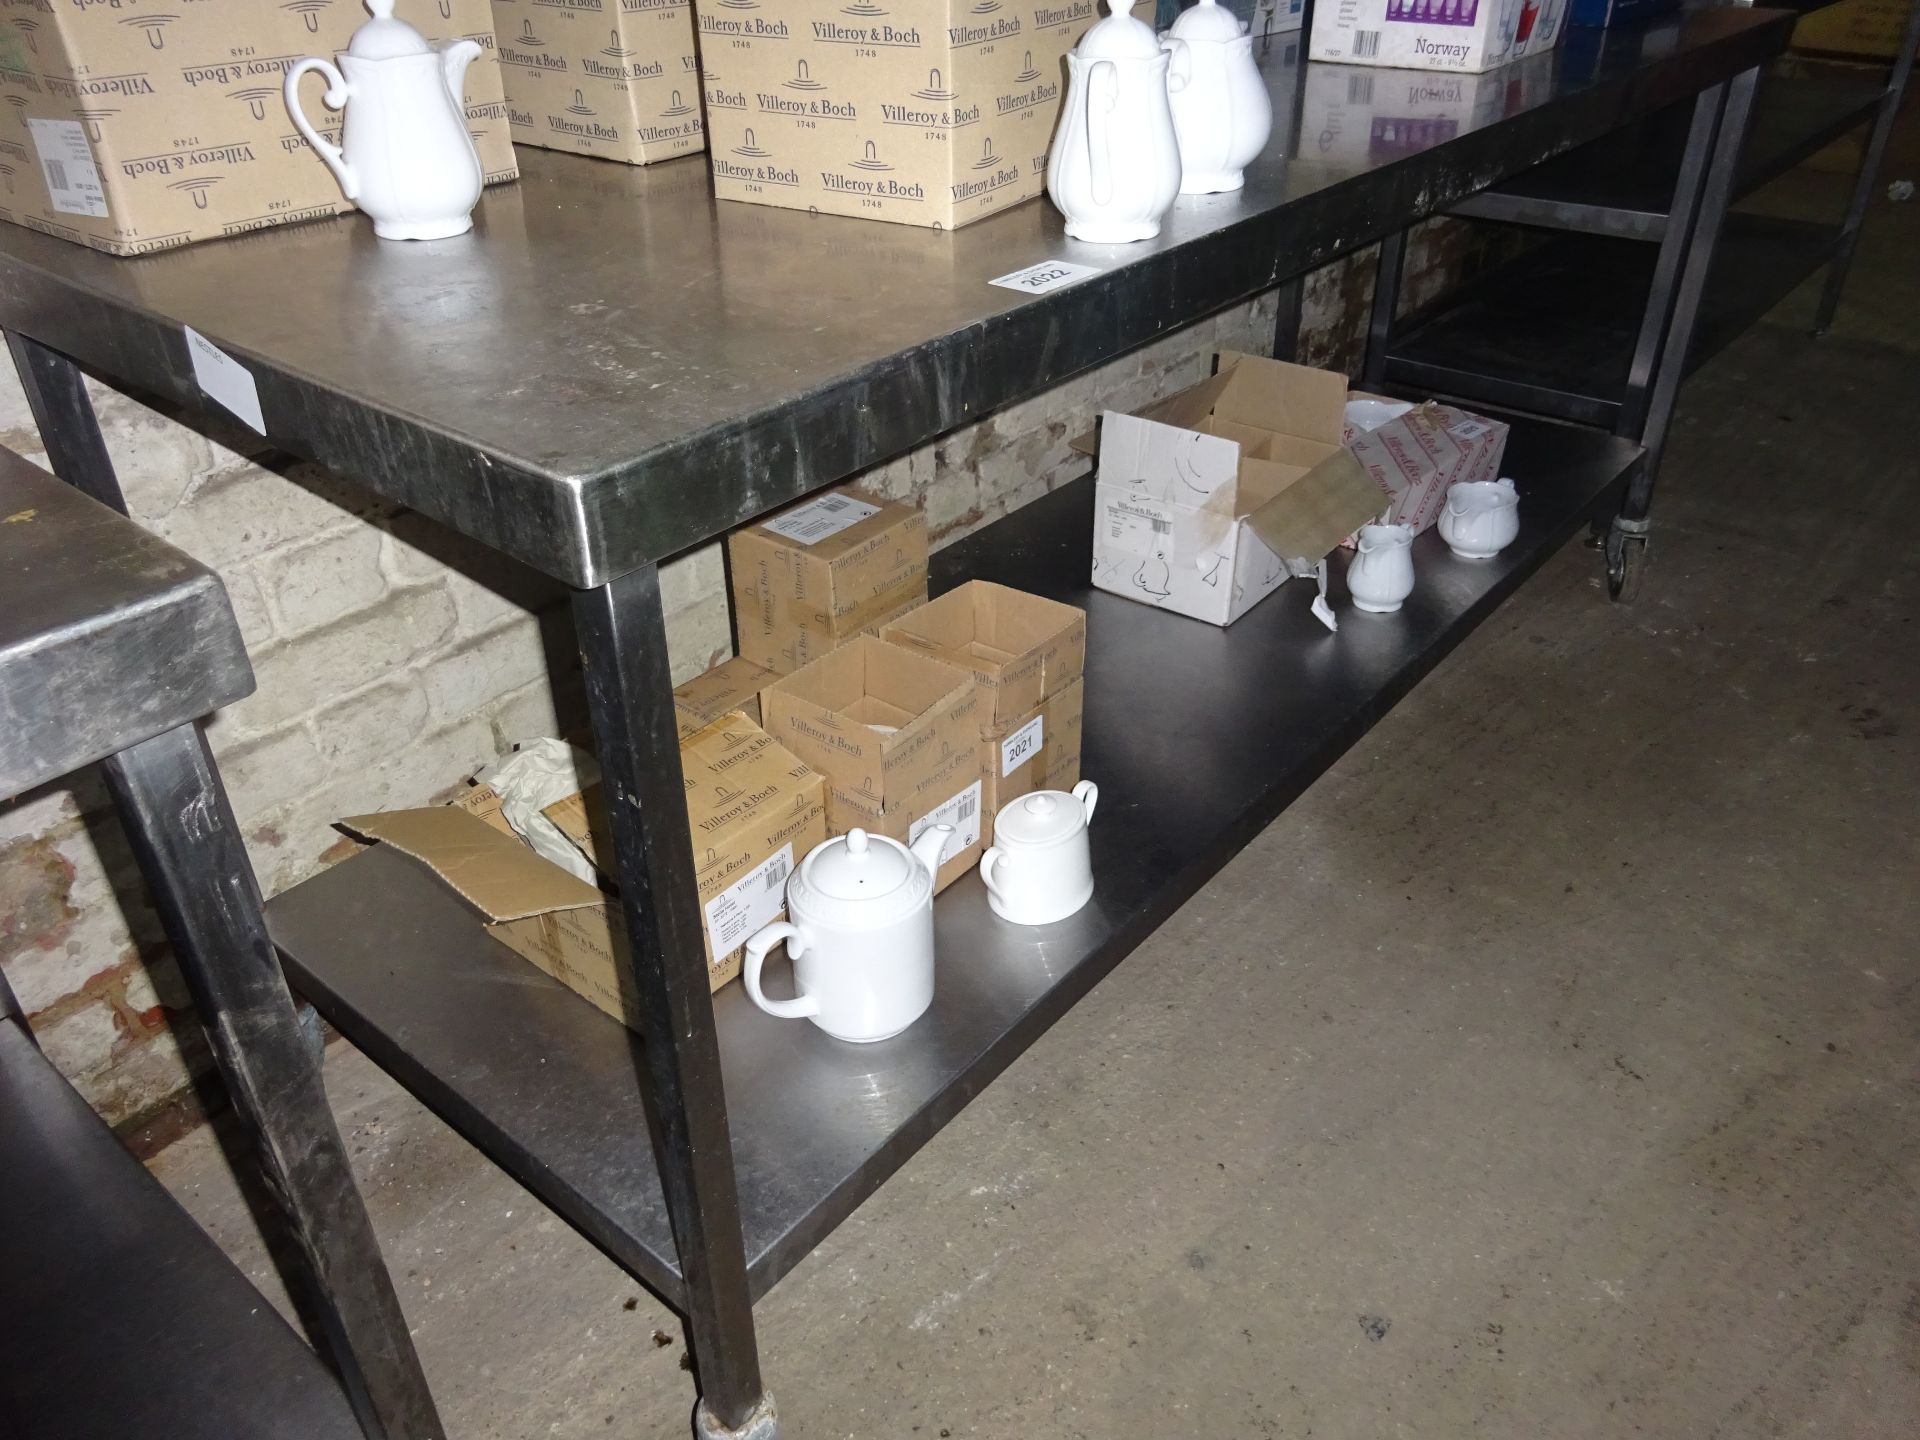 Mobile stainless steel preparation table with under shelf.